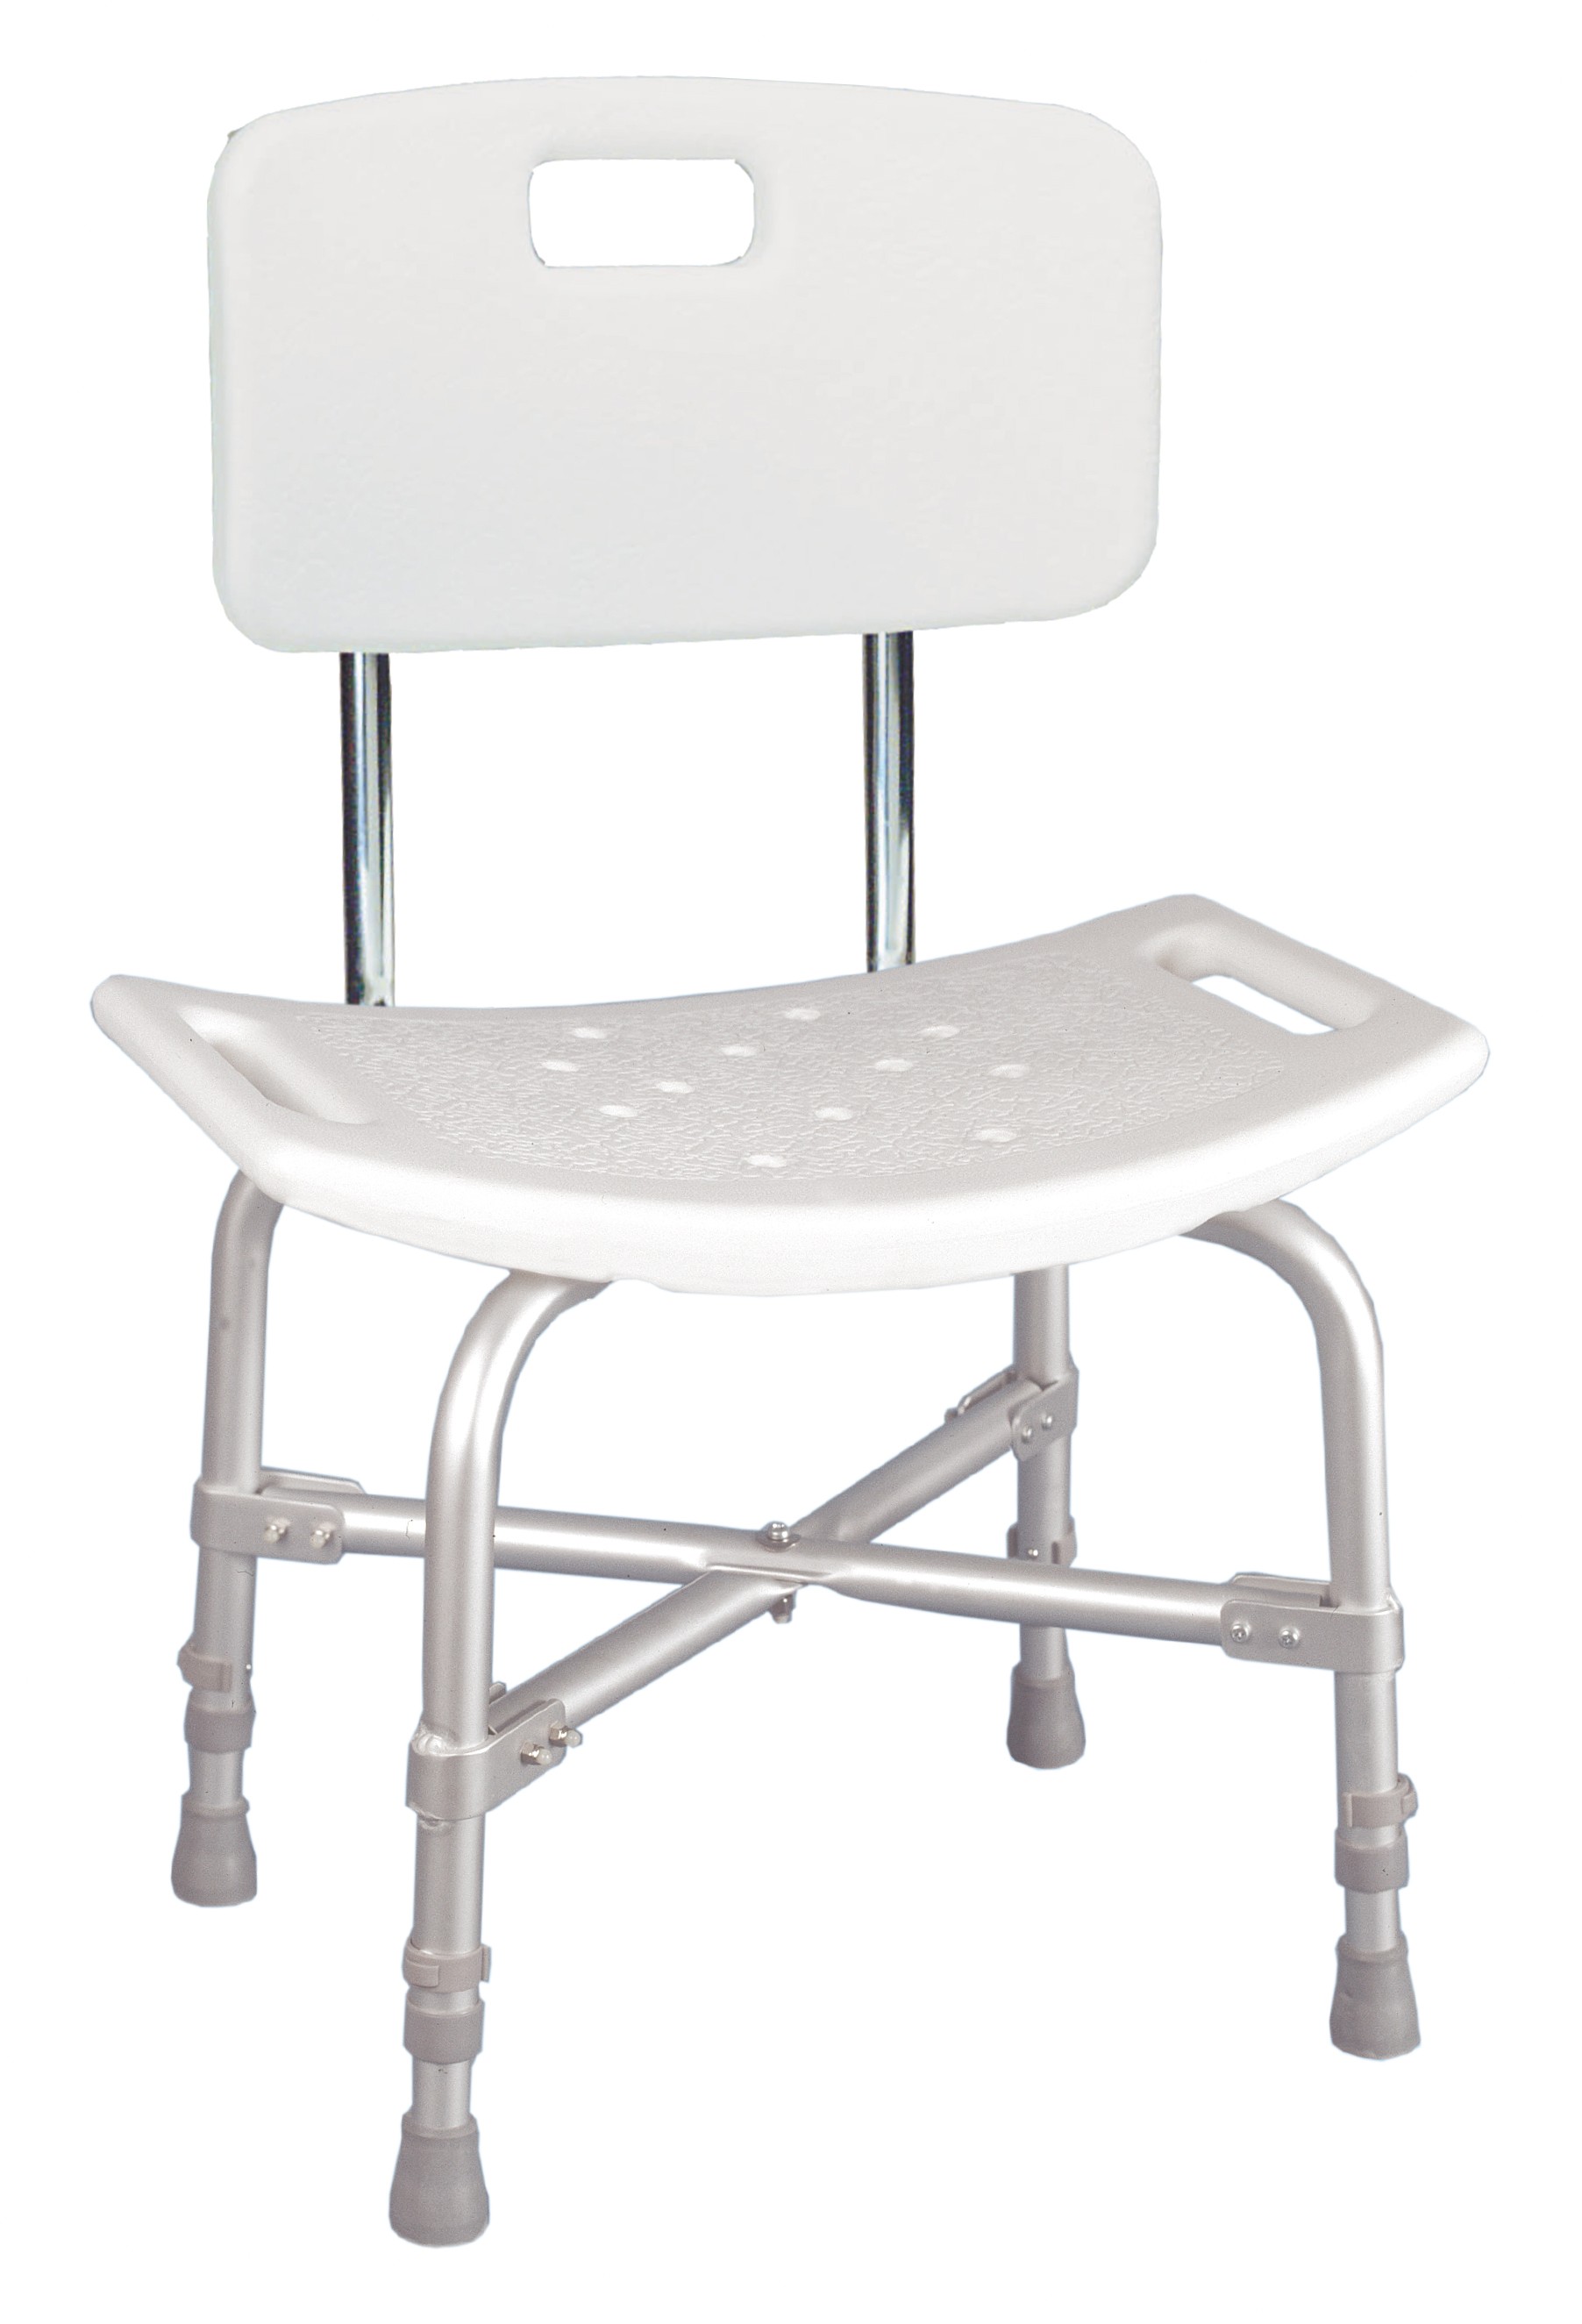 Bariatric Bath Seat With Back